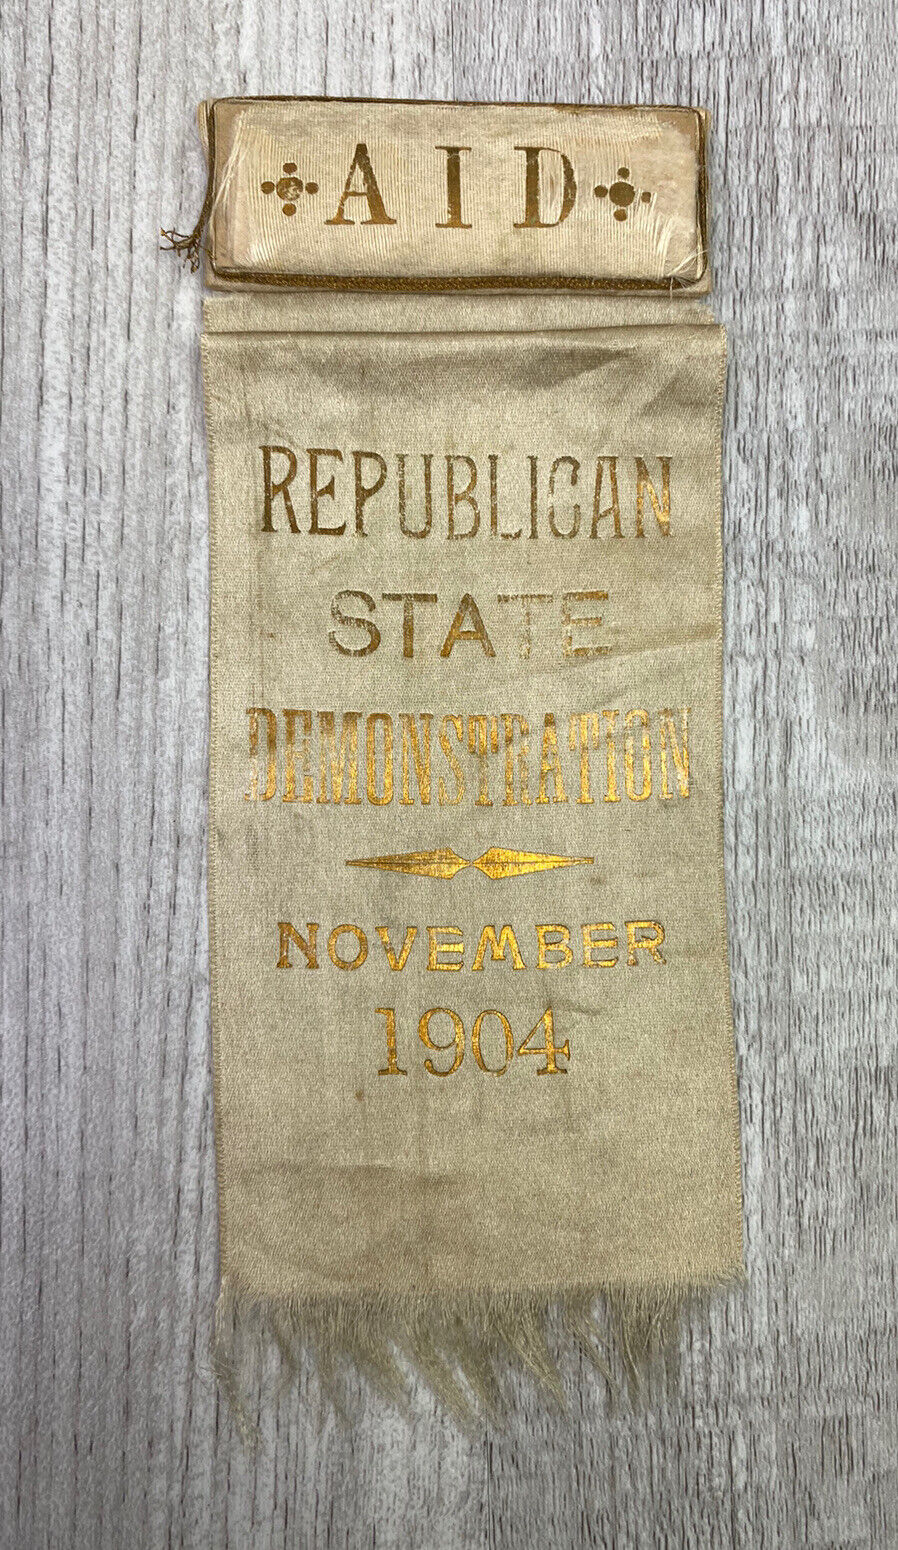 Antique ￼Republican State demonstration aid Rhode Island 1904￼ Ribbon Pin